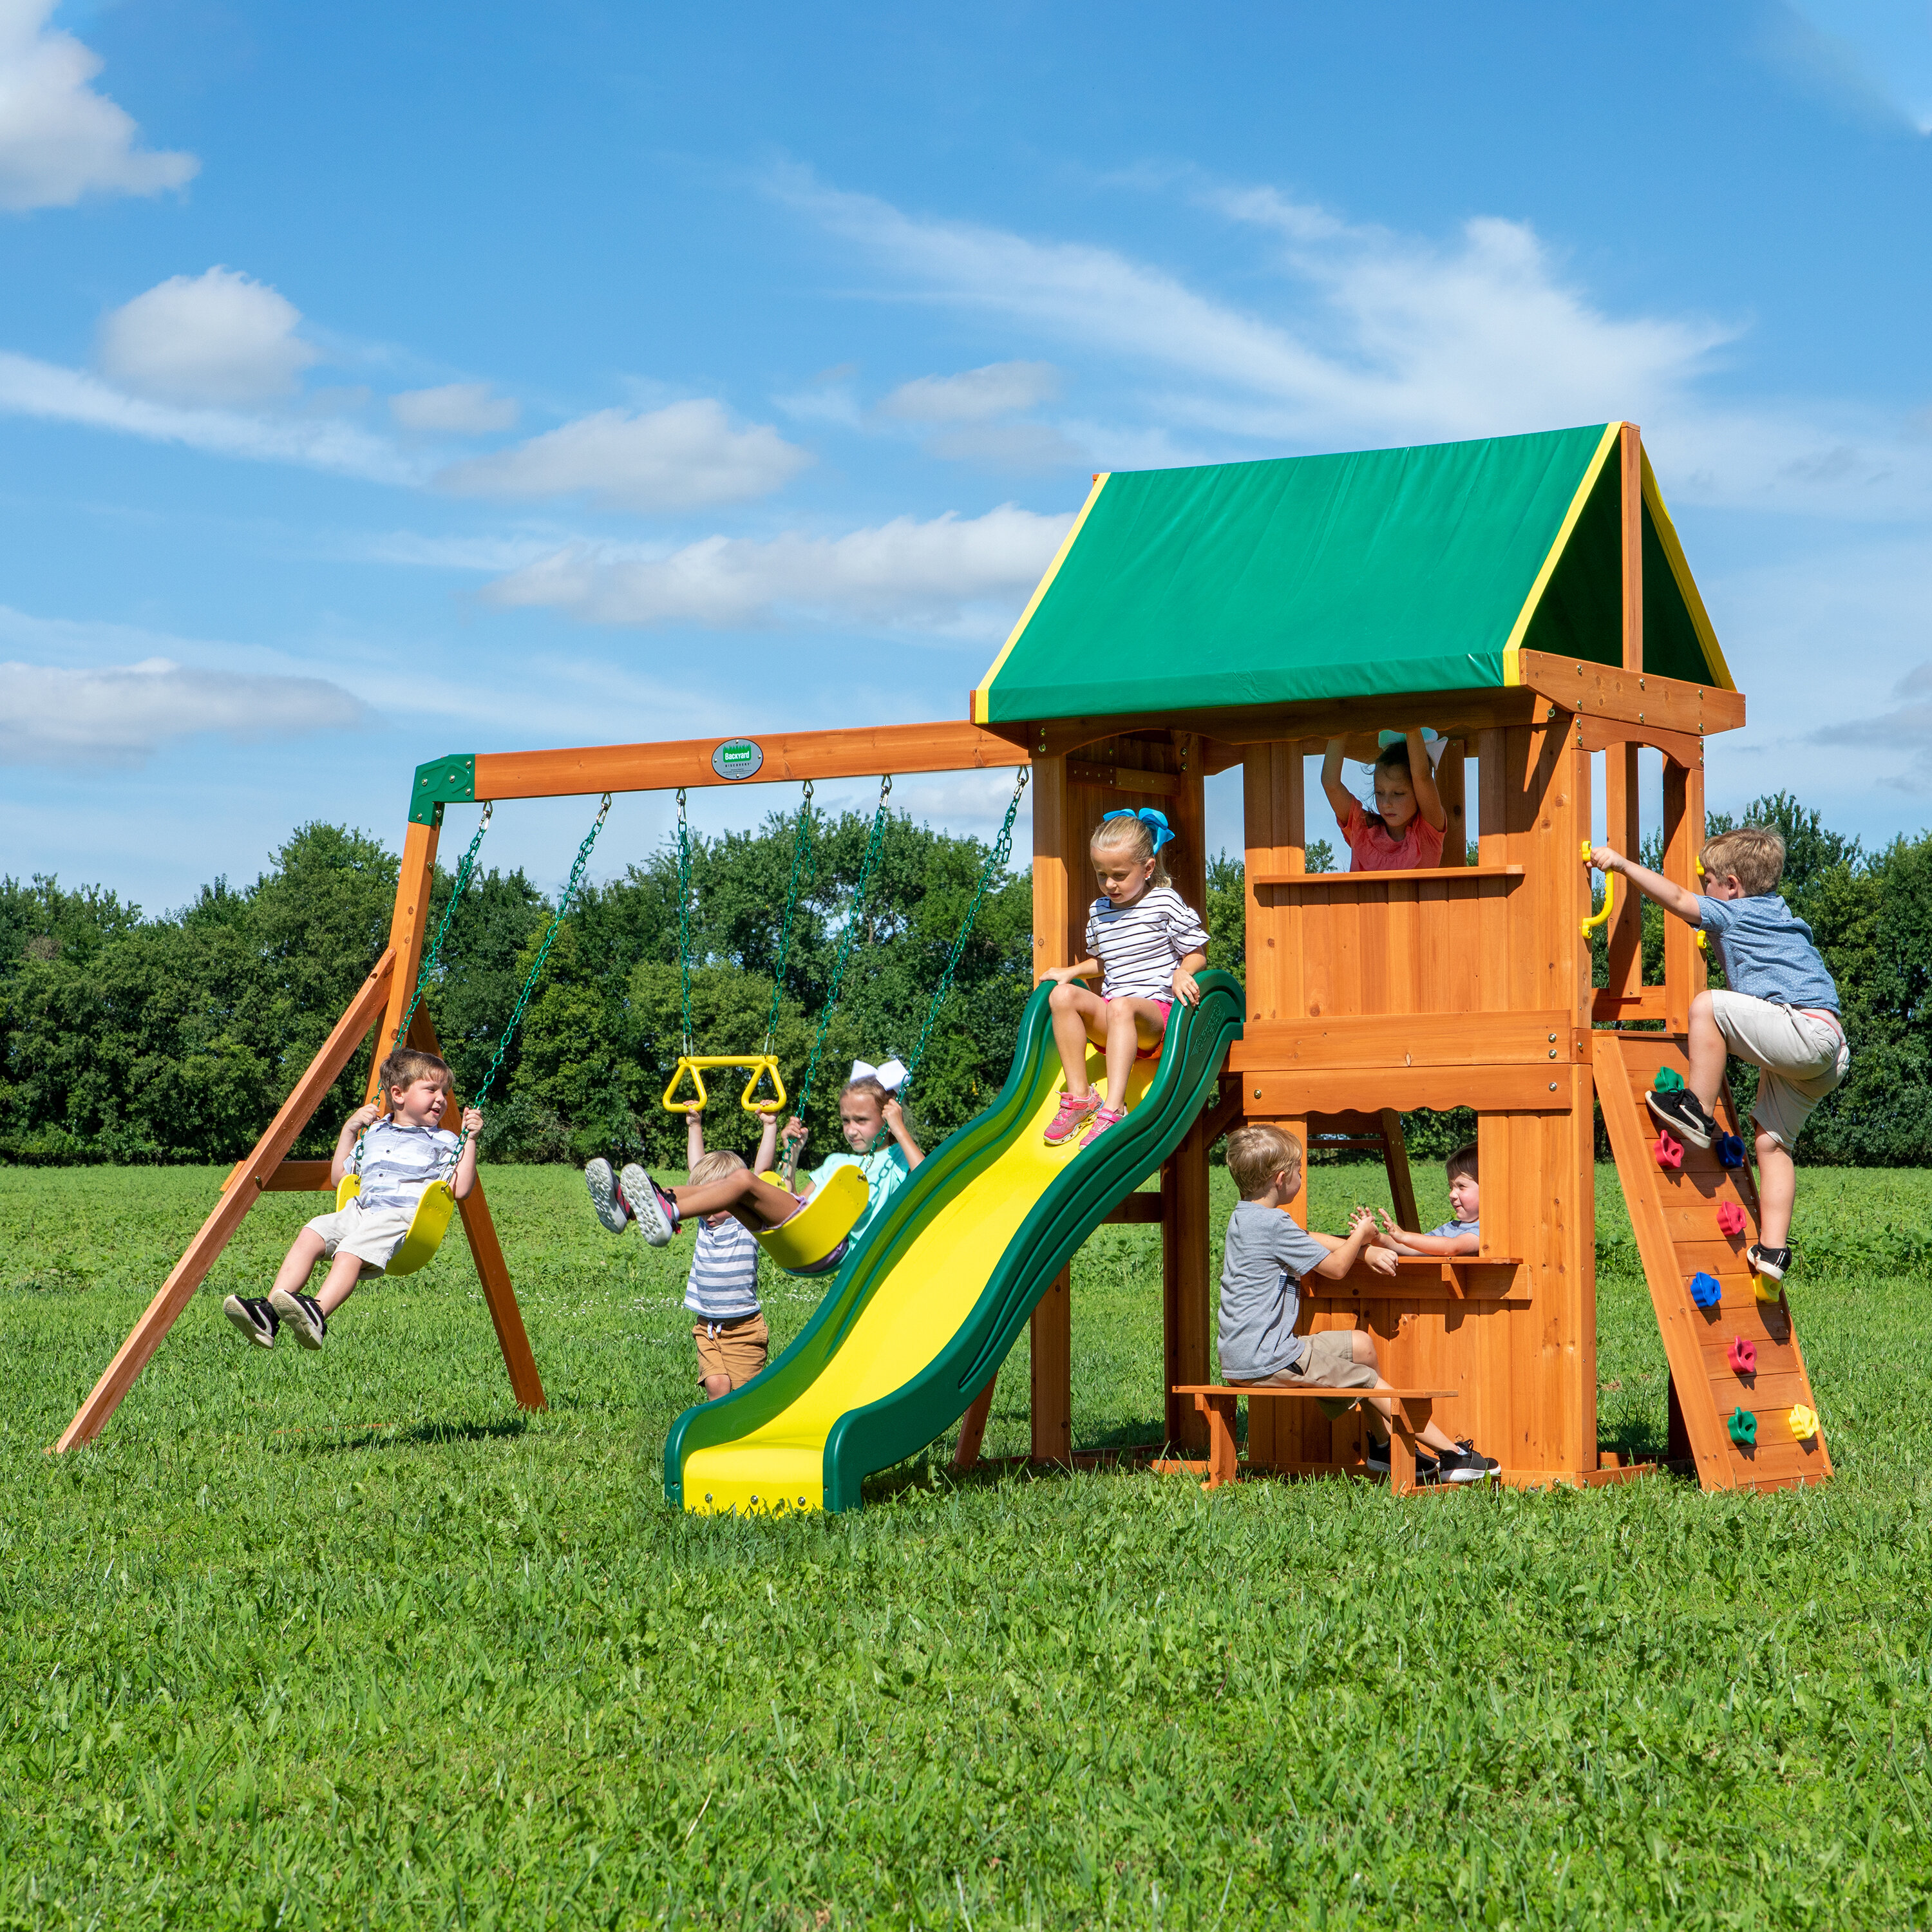 inexpensive swing sets